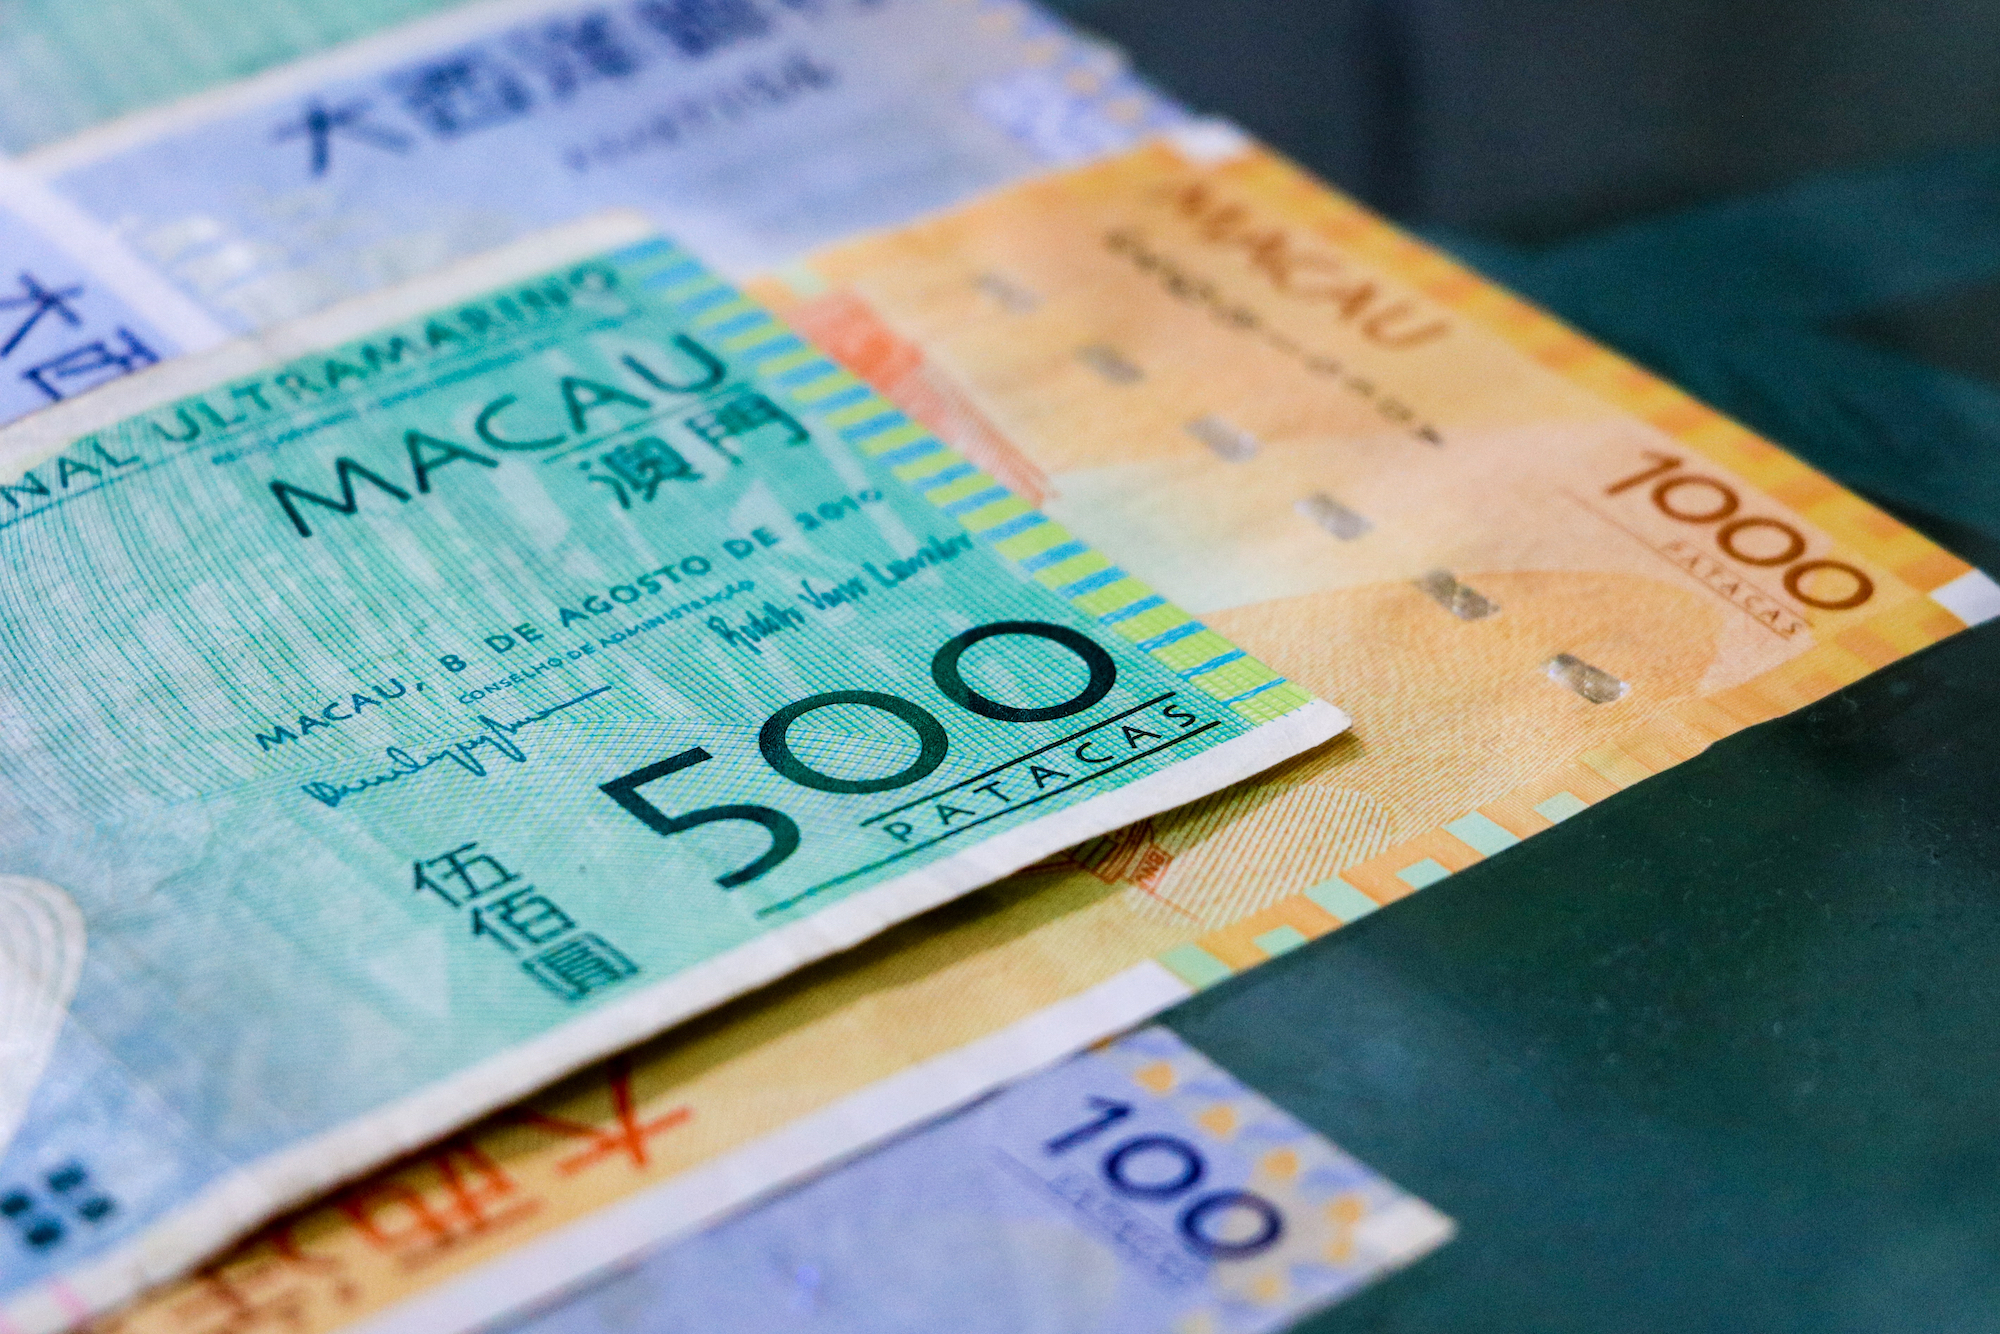 Loan grace periods have been extended for businesses in Macao